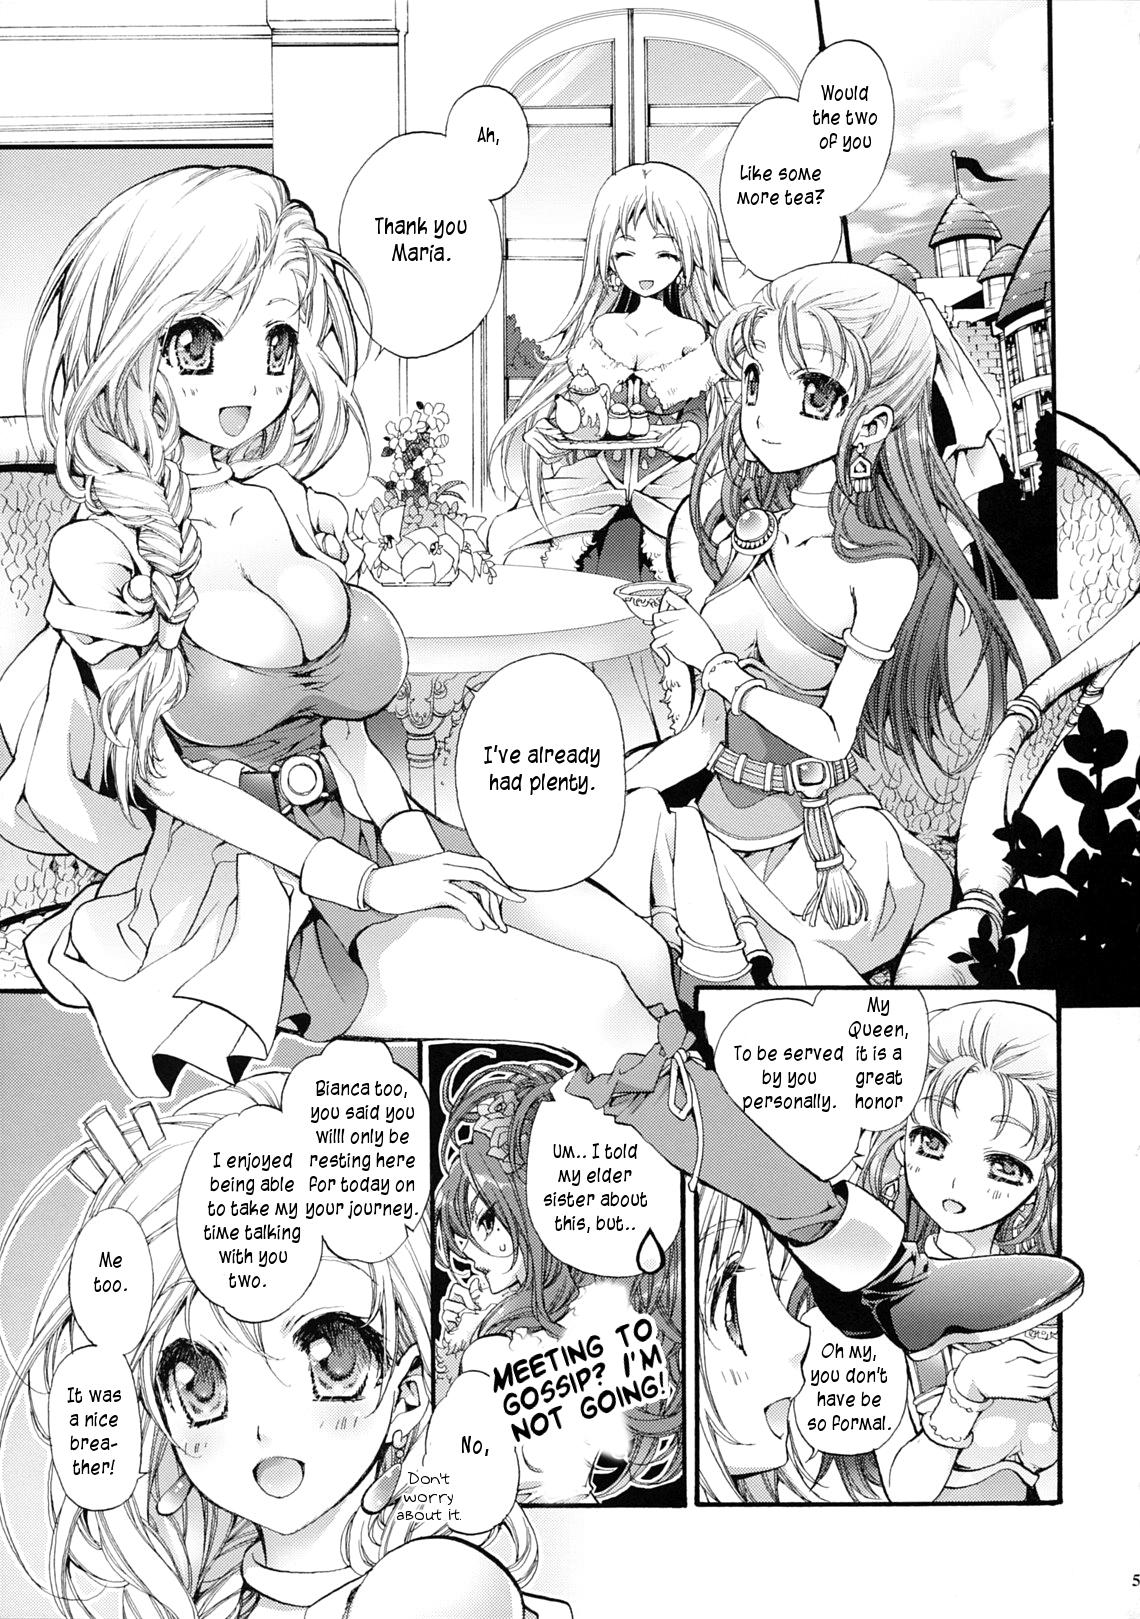 Soloboy Hitomi no Naka no Sora | The Sky In Your Eyes - Dragon quest v Analsex - Page 4